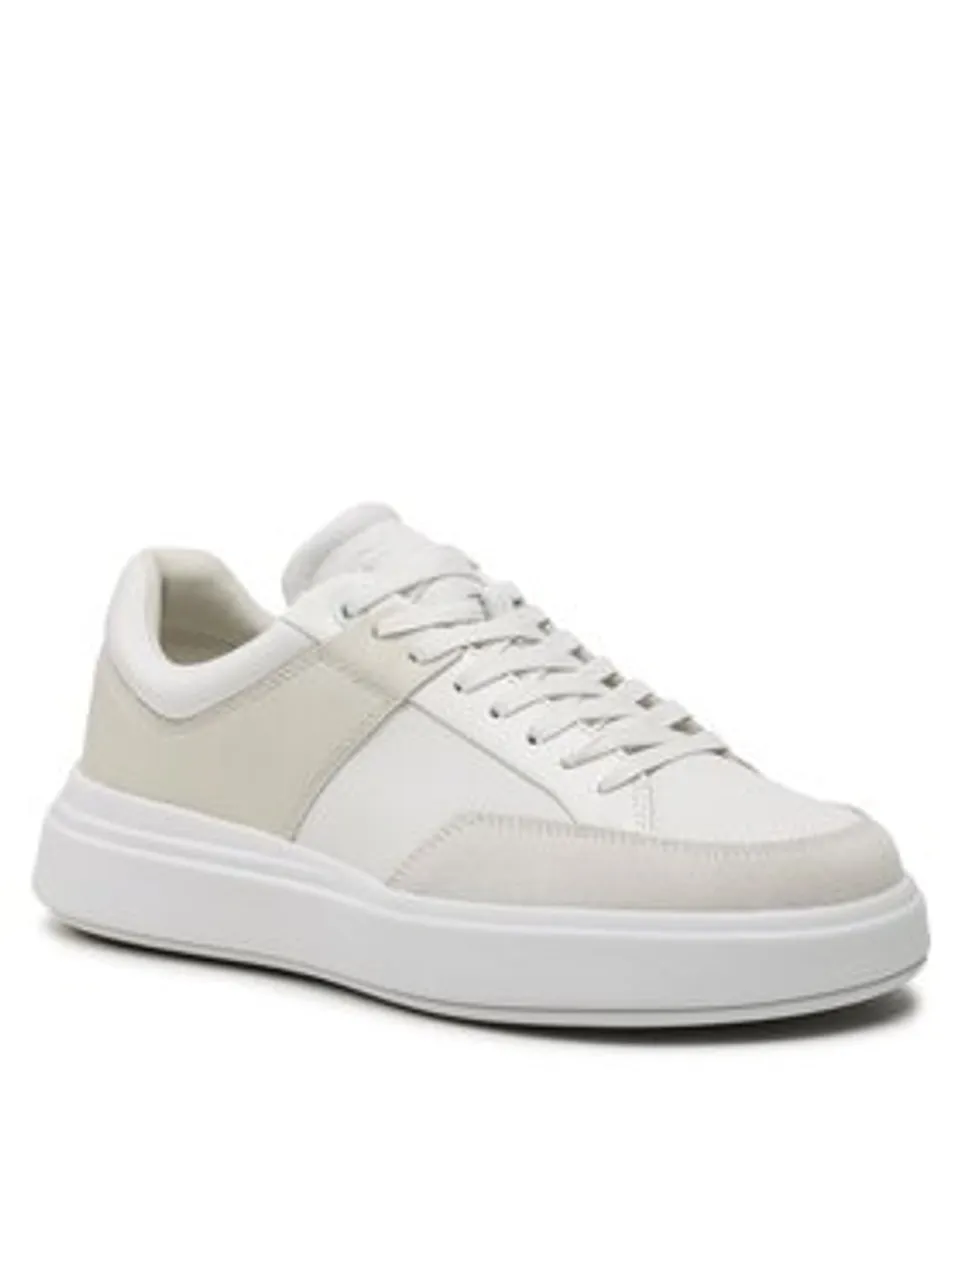 Calvin Klein Sneakers Low Top Lace Up HM0HM01047 Weiß